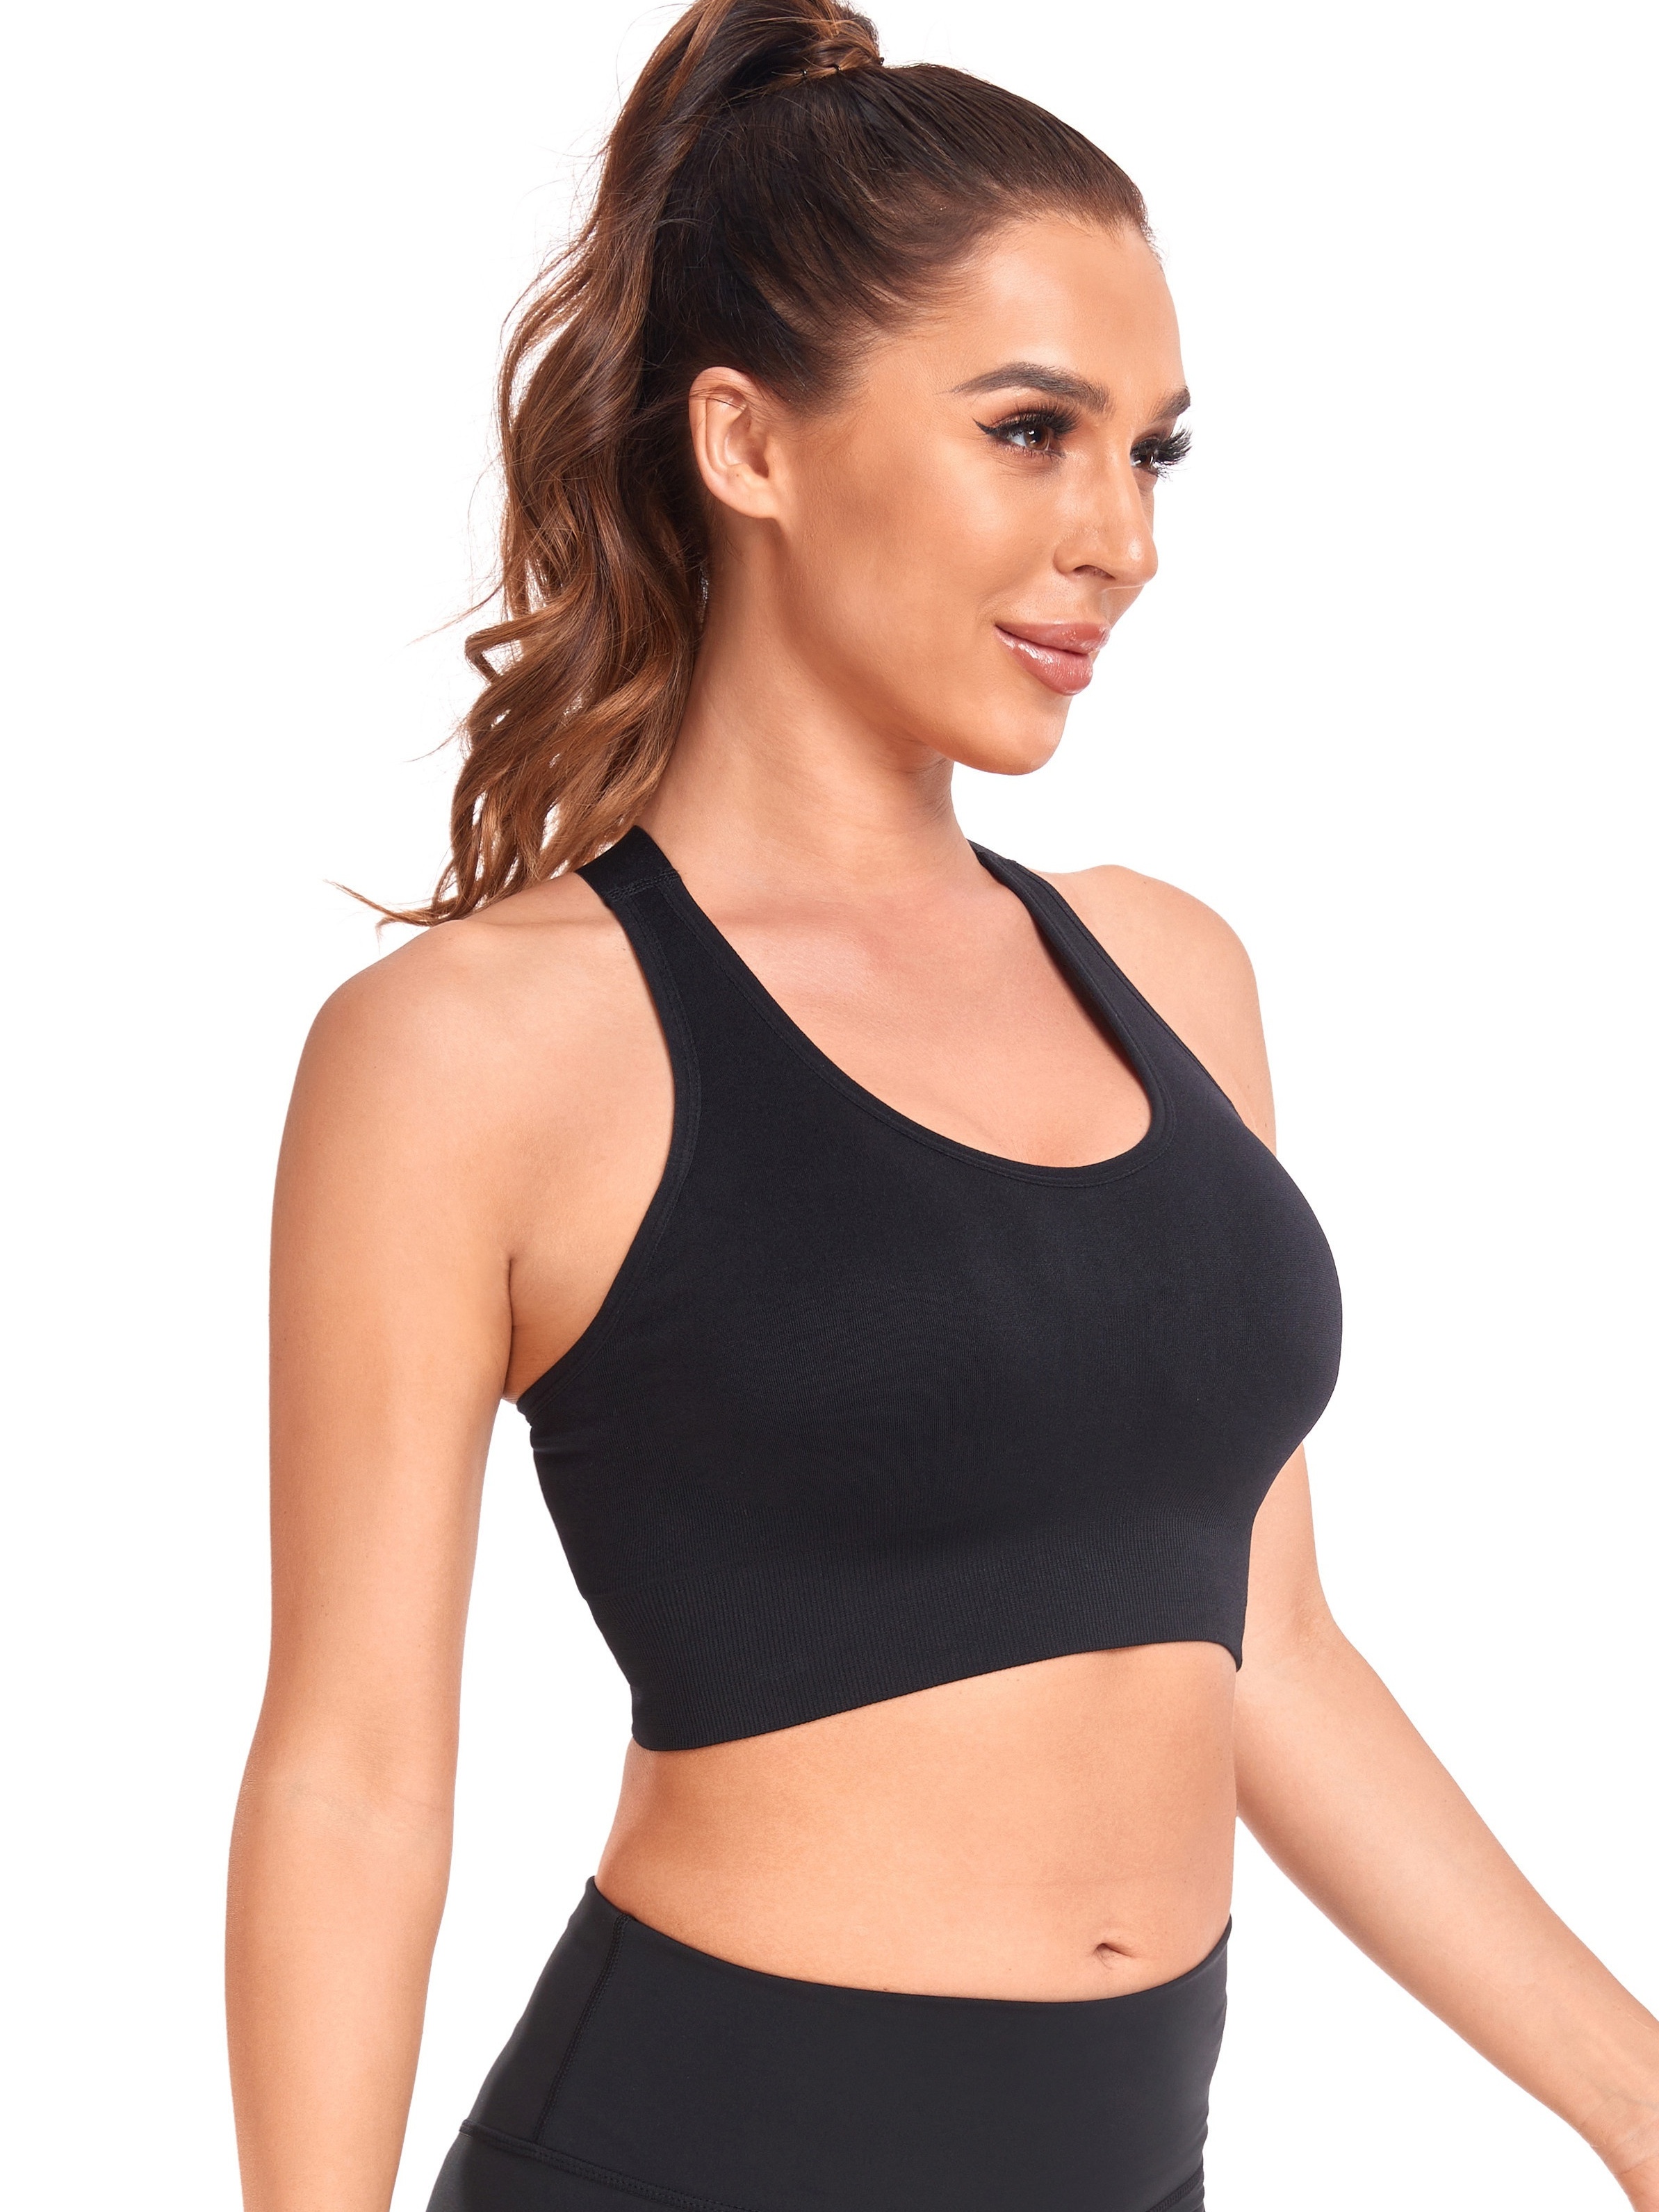 High Impact Backless Yoga Sports Bra Large Size Sports Bra Tank For Womens  Gym Workout And Active Wear From Ejuhua, $15.18